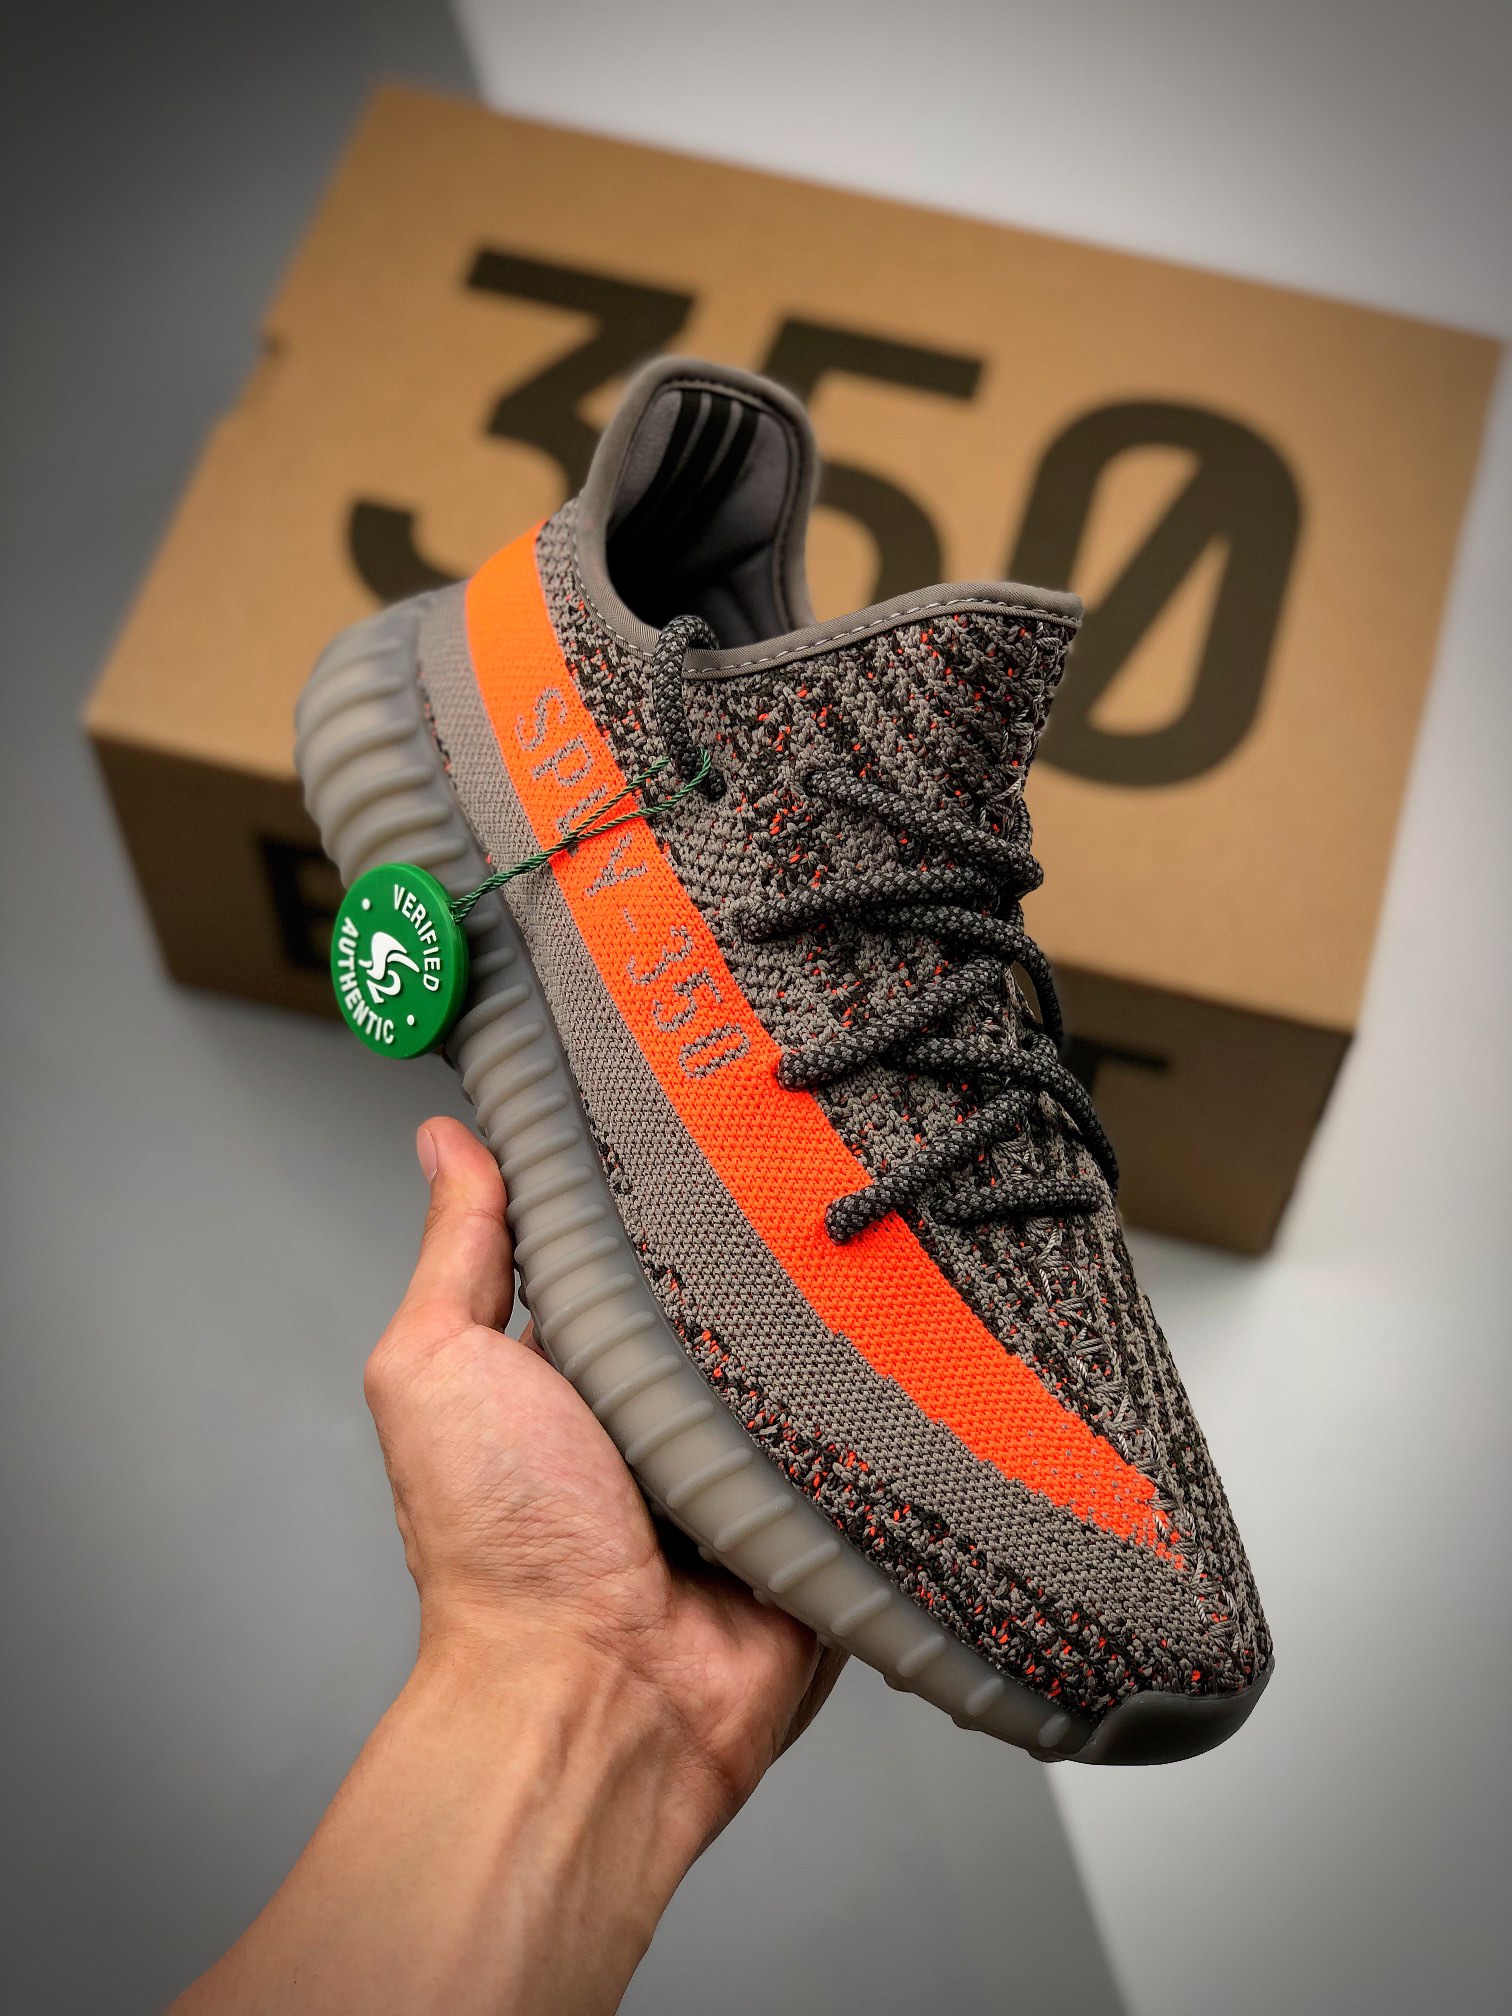 adidas YEEZY BOOST 350 V2 “Beluga Reflective” For Sale – Sneaker Hello